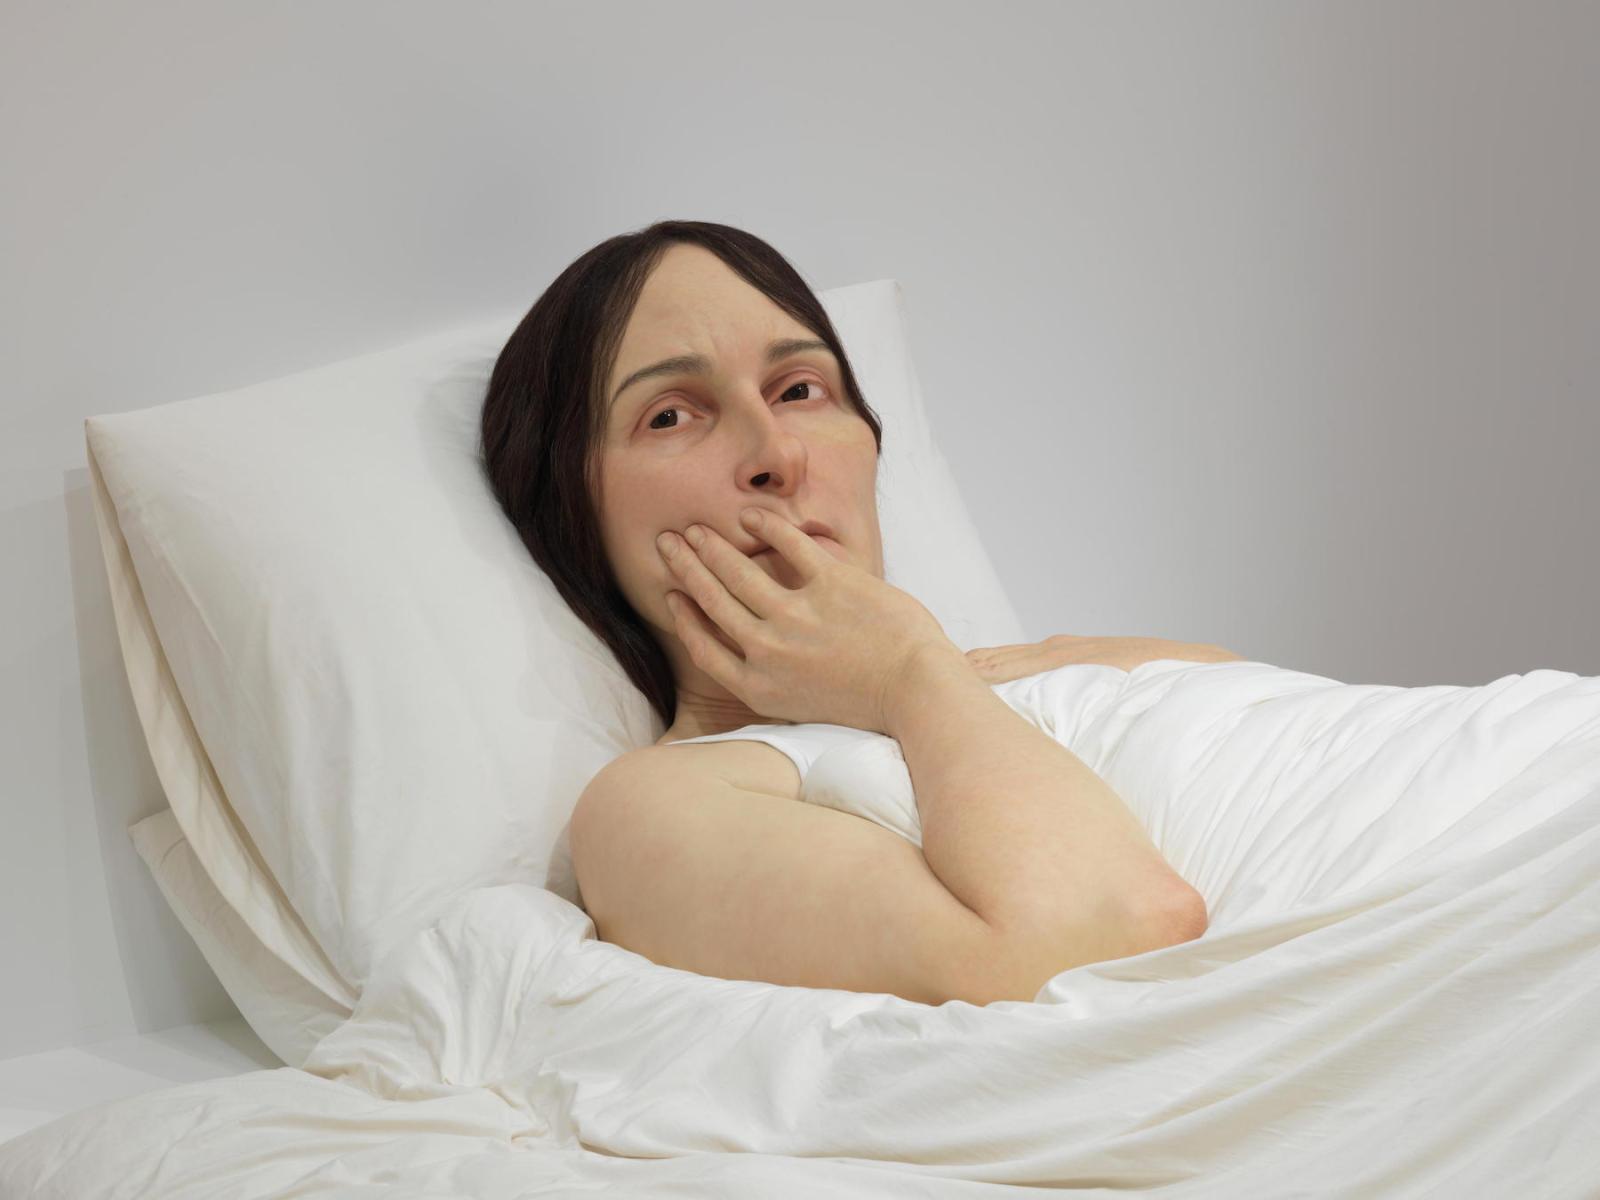 A sculpture shows a worried oversized woman lying in bed